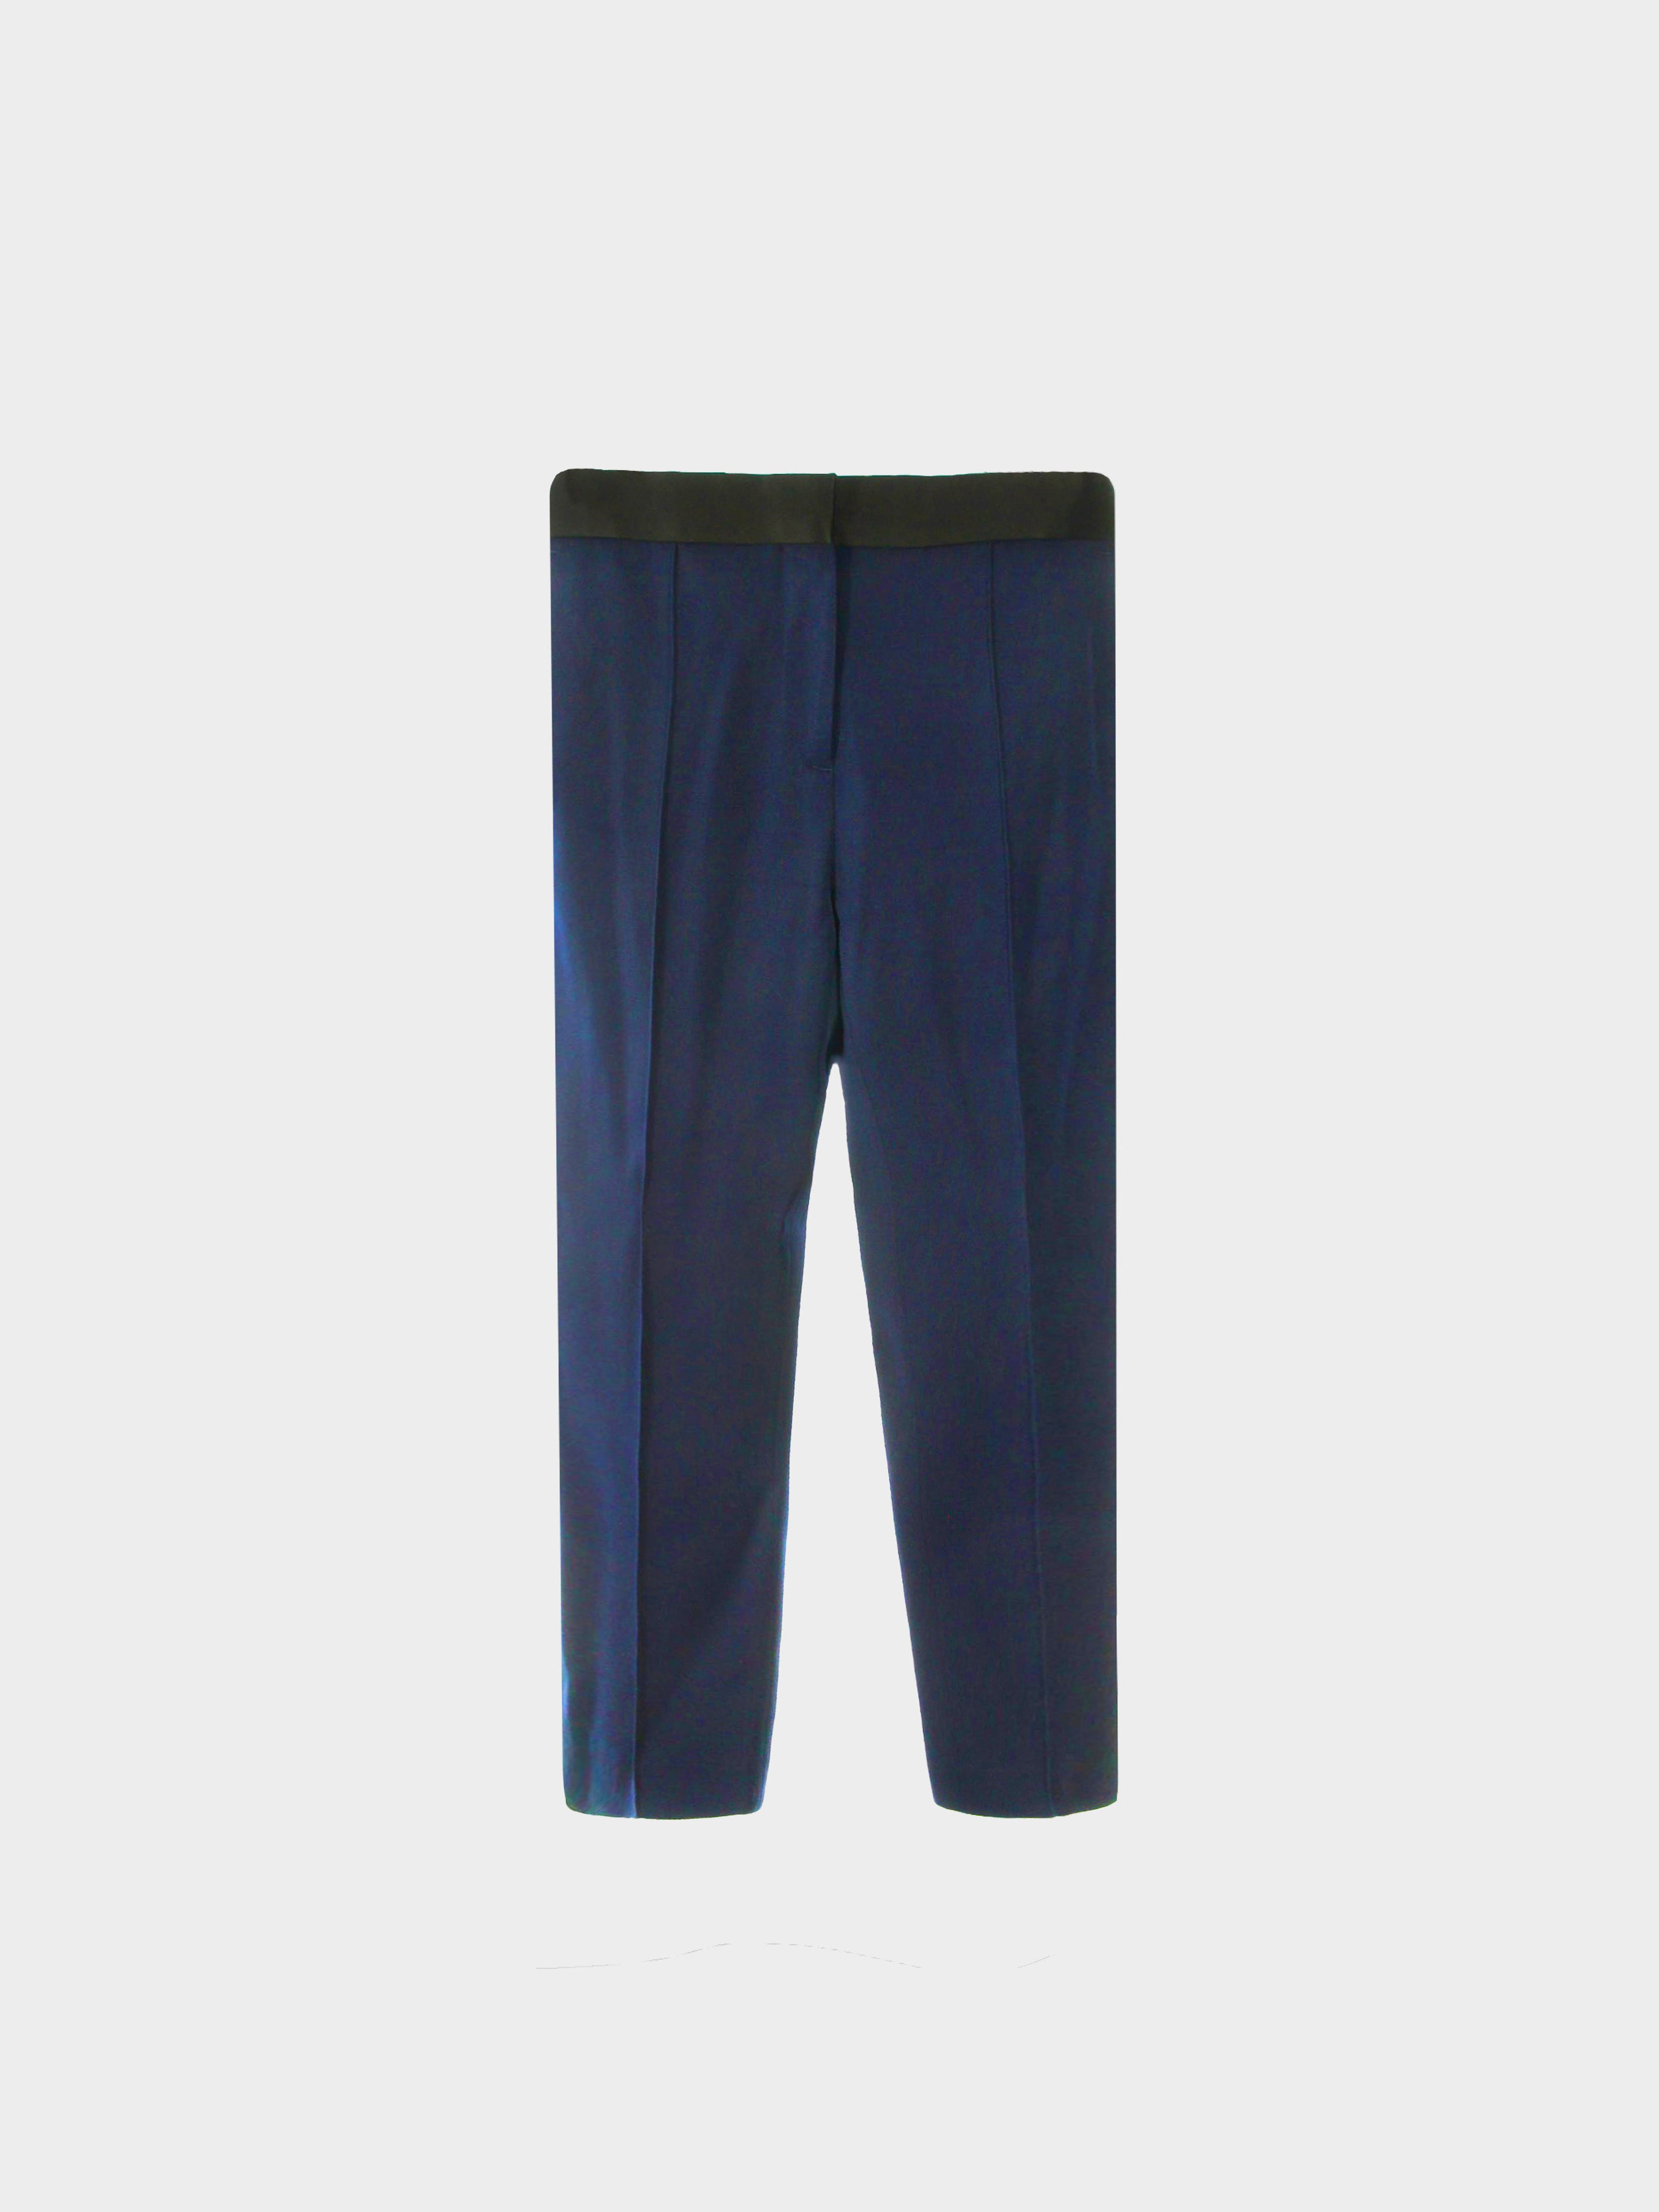 Céline by Phoebe Philo 2000s Navy Blue Stovepipe Trousers · INTO